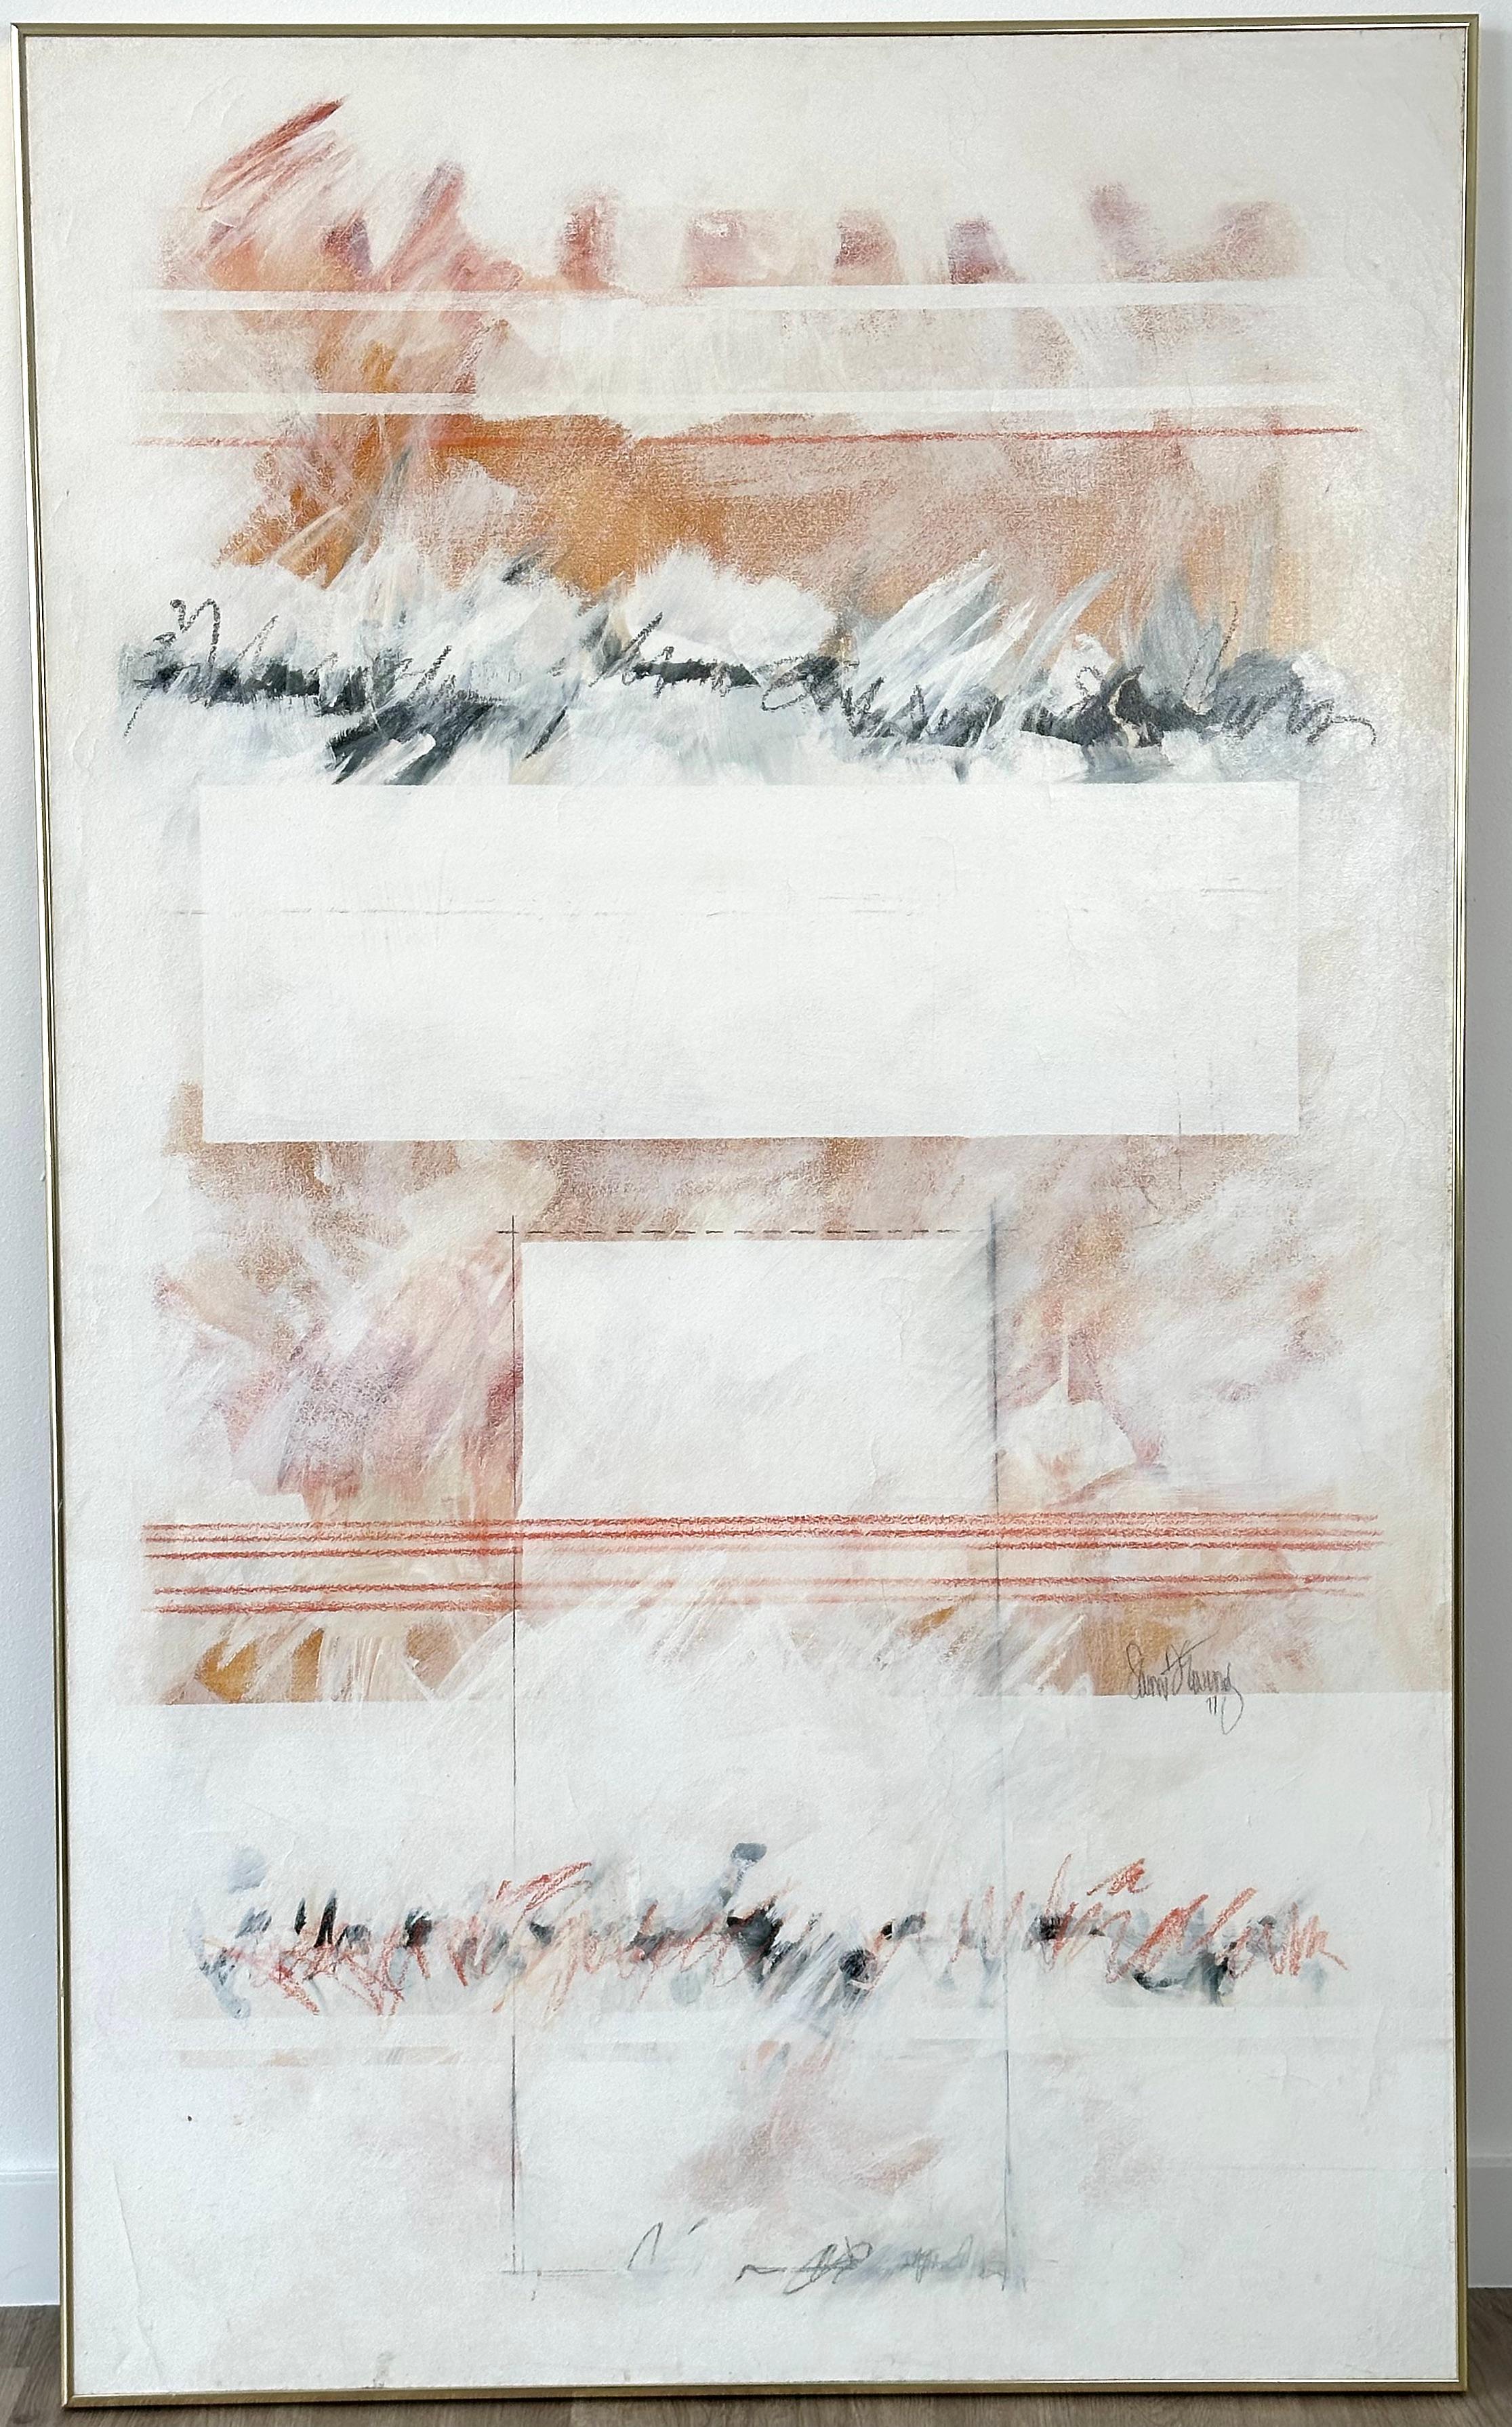 Beautiful abstract Minimalist painting by unknown artist. Dated 1977. Oil on canvas measures 36 x 60 inches. Signed and dated lower right. 